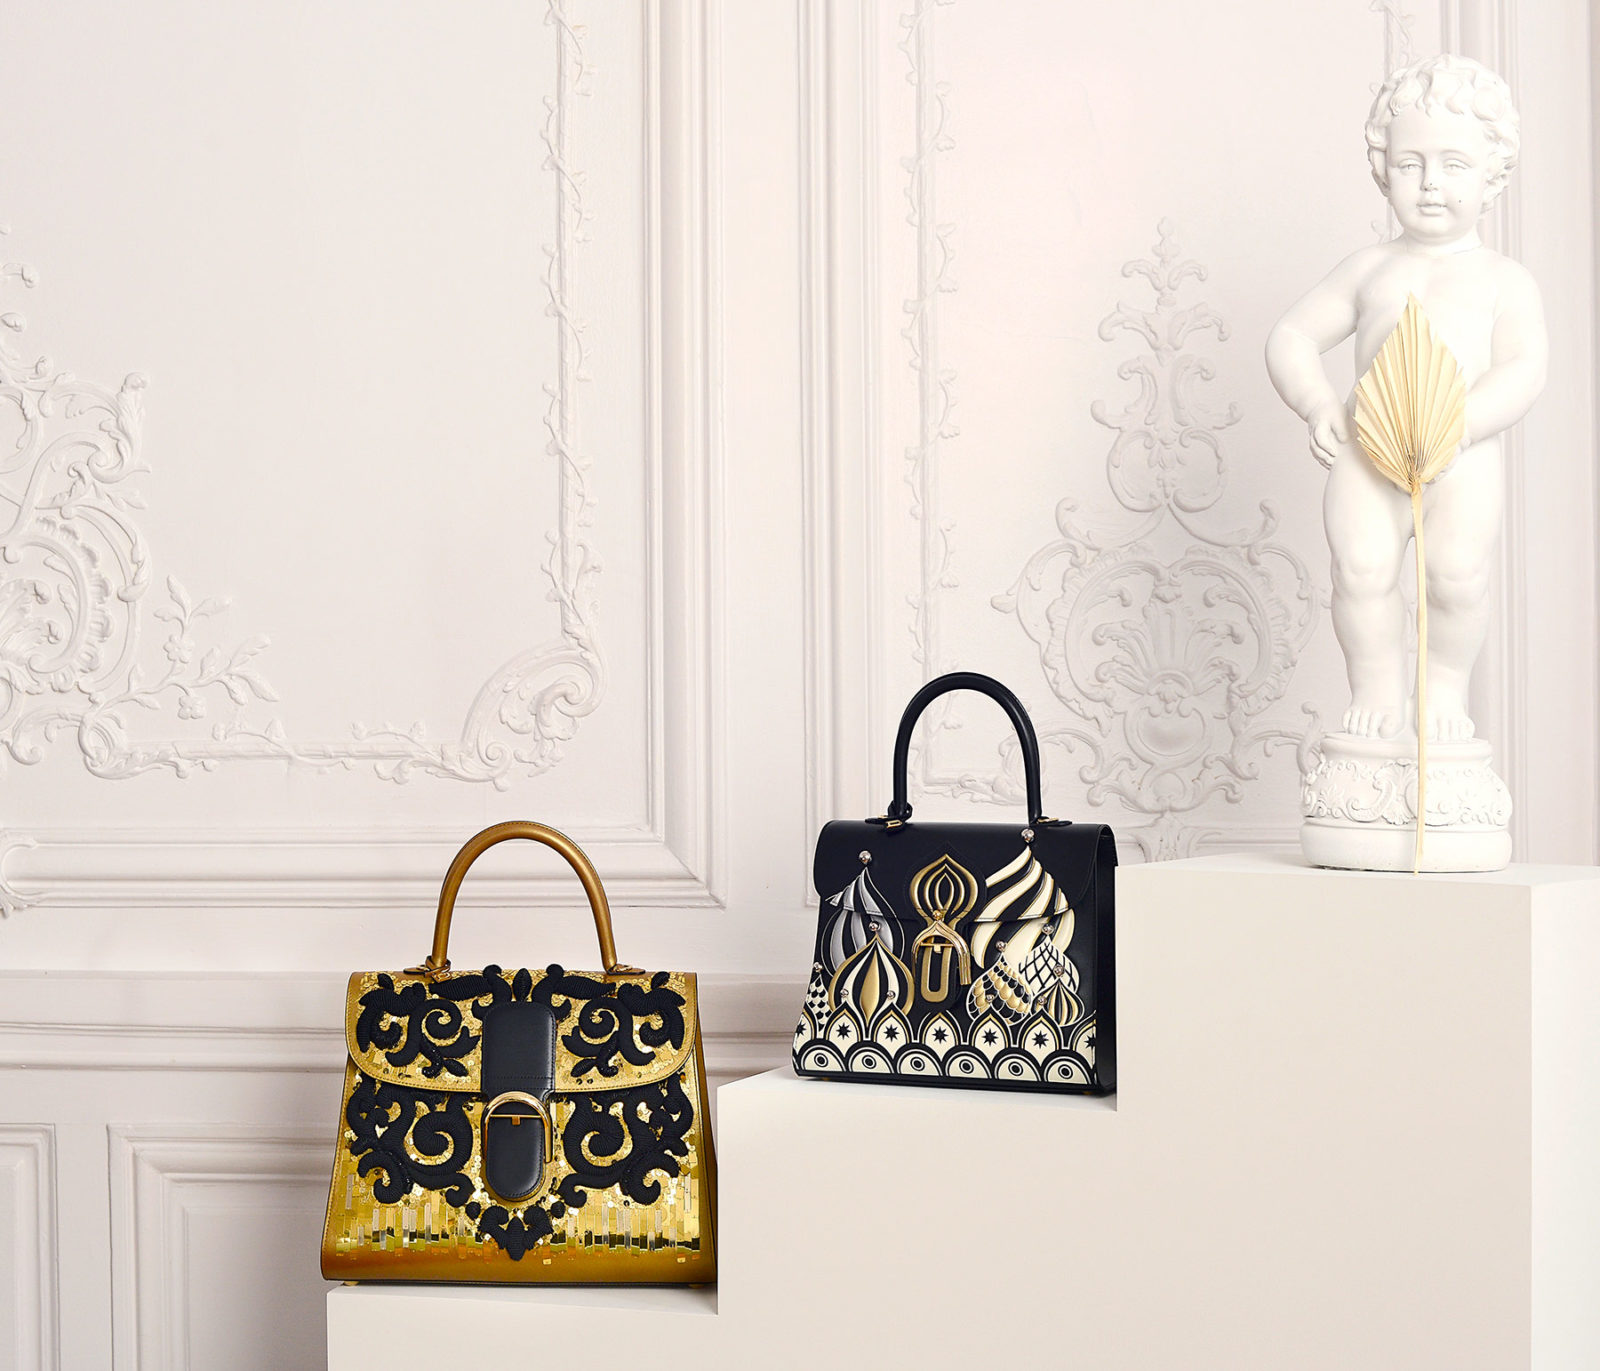 Delvaux: Delvaux Introduces Its New Stunning Campaign: Canvas